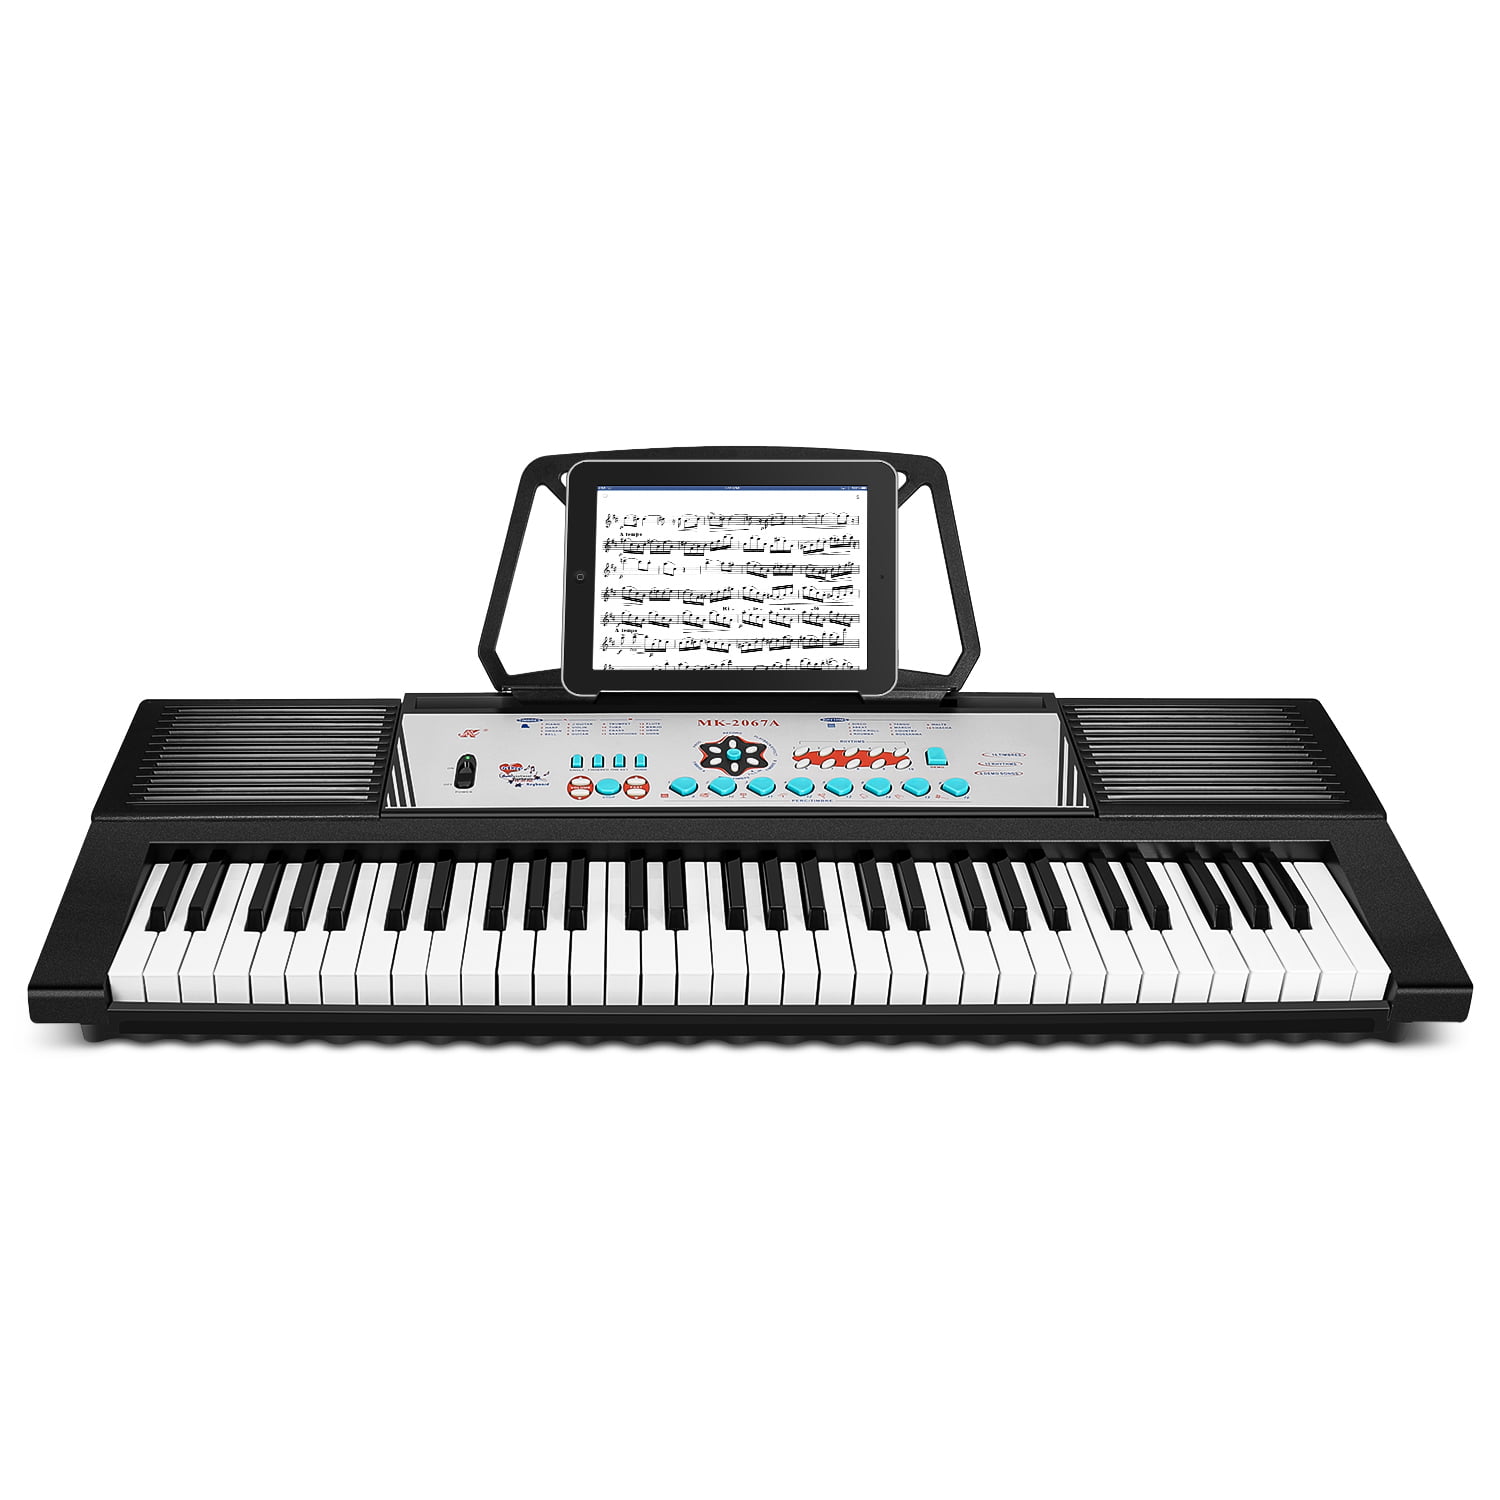 Sustain Record Playback USB MP3 Player Flexzion 61-Key Electronic Keyboard Professionals Digital Piano w/Standard Full Size Weighted Action Keys Rhythm Programming AUX/Microphone IN OUT 